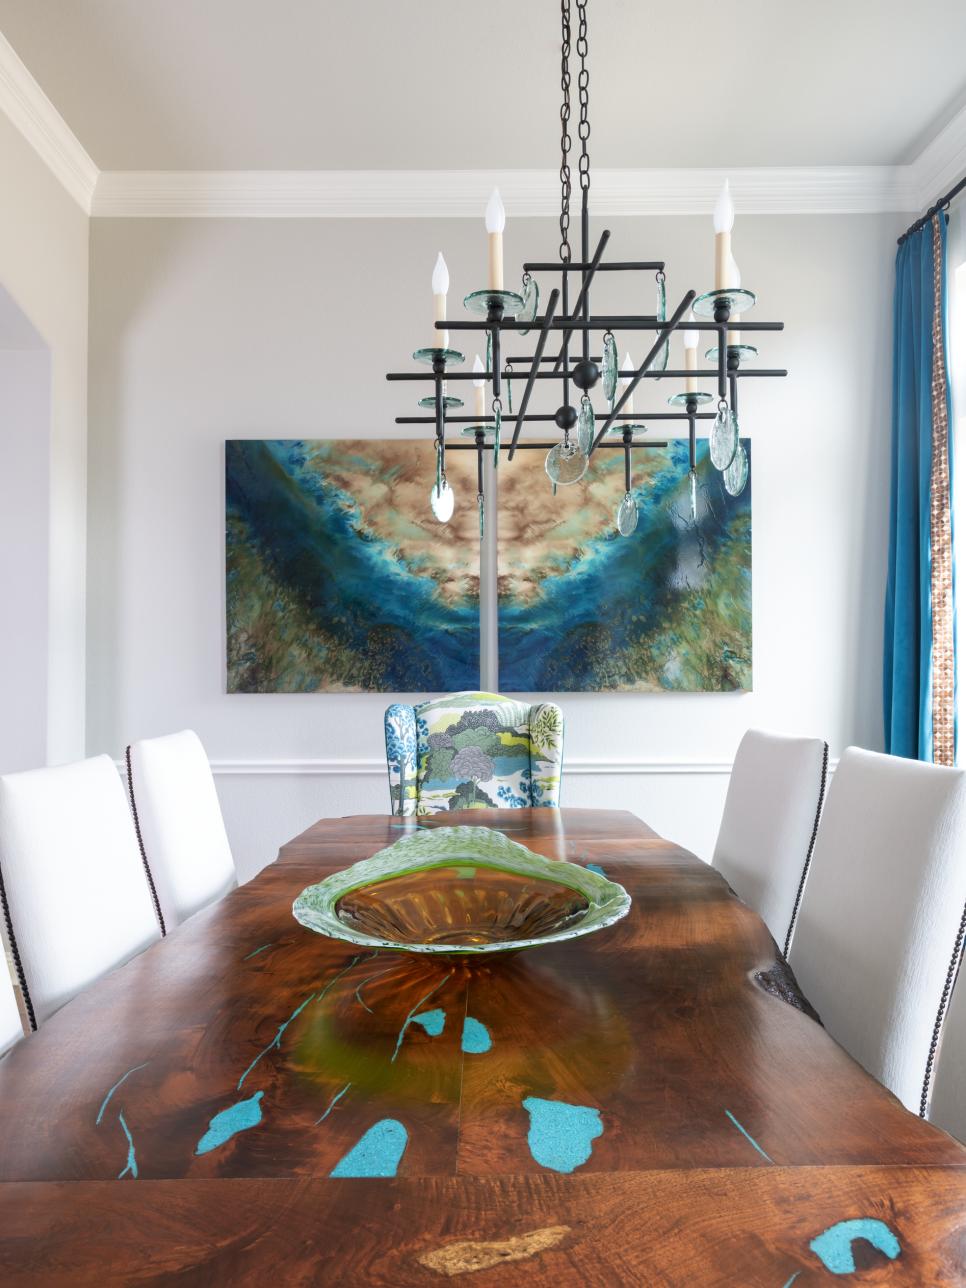 Live Edge Dining Table With Modern, Contemporary Chandelier For Dining Room